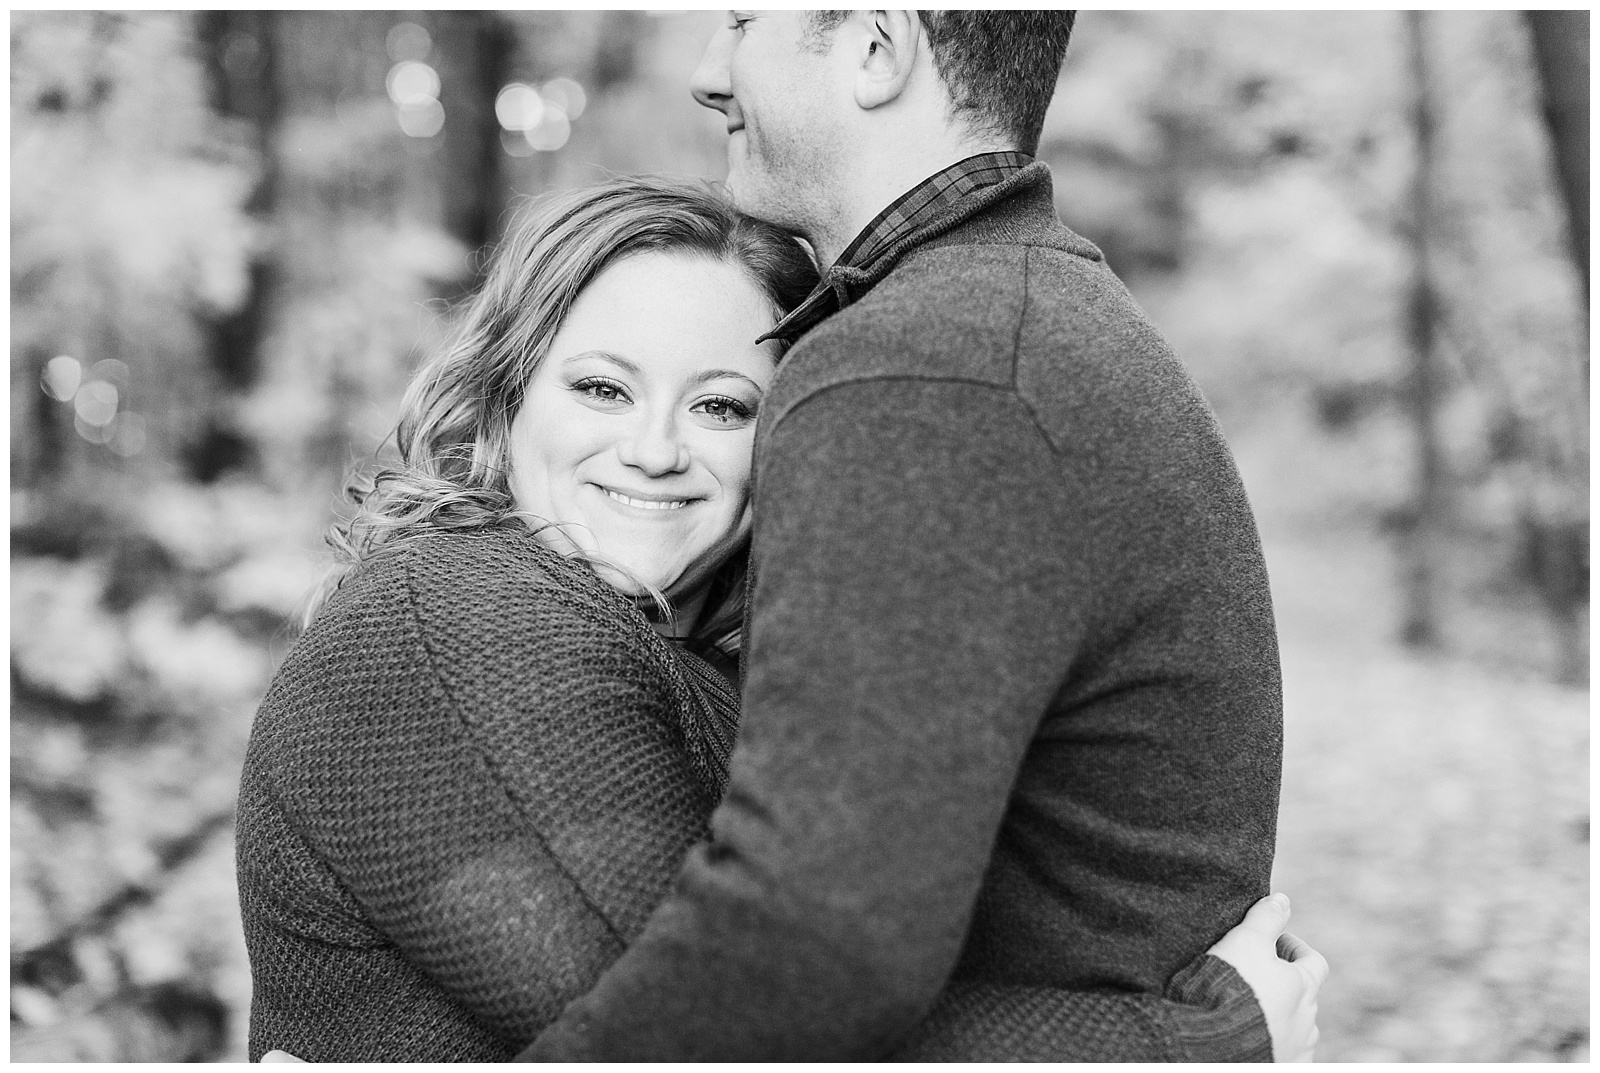 Couple embraces during Northern Michigan photography engagement session.